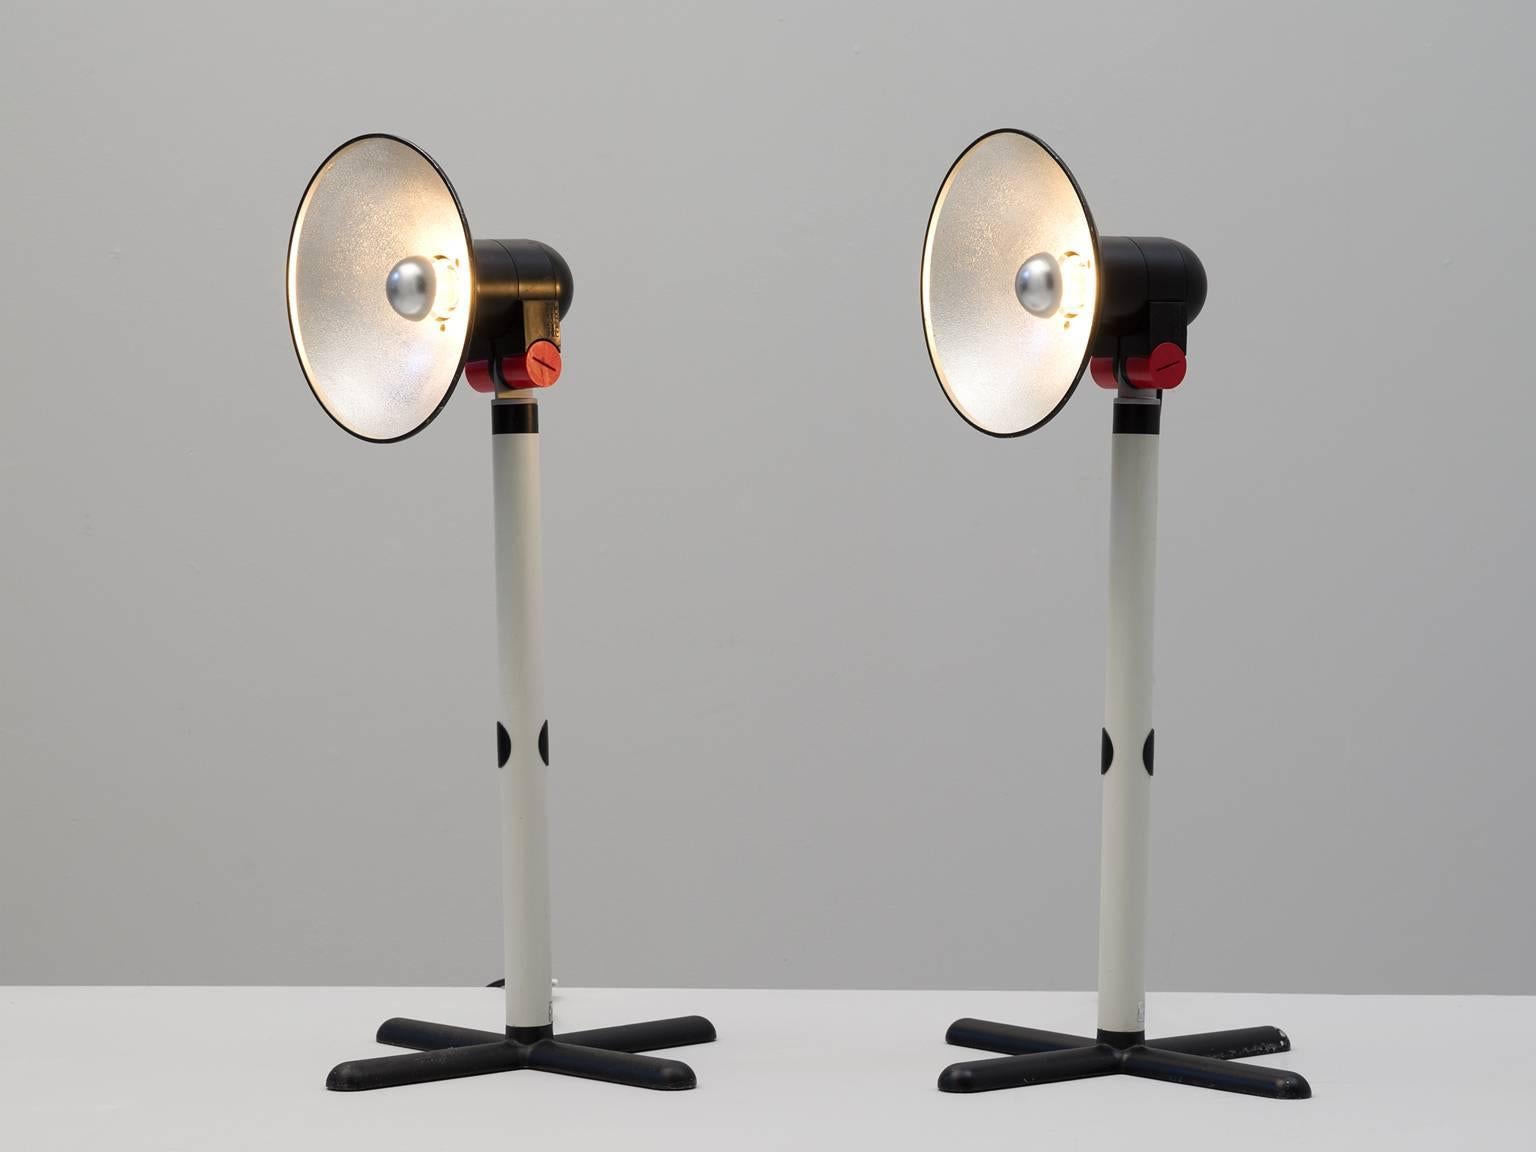 Table lamp, 'Spot' designed by Roger Tallon for Erco, black iron cas, grey lacquered metal, metal, fitting in black and red ABS plastic, France, 1972.

These table lamps with crossed base are iconic lamps by the French designer Roger Tallon. The